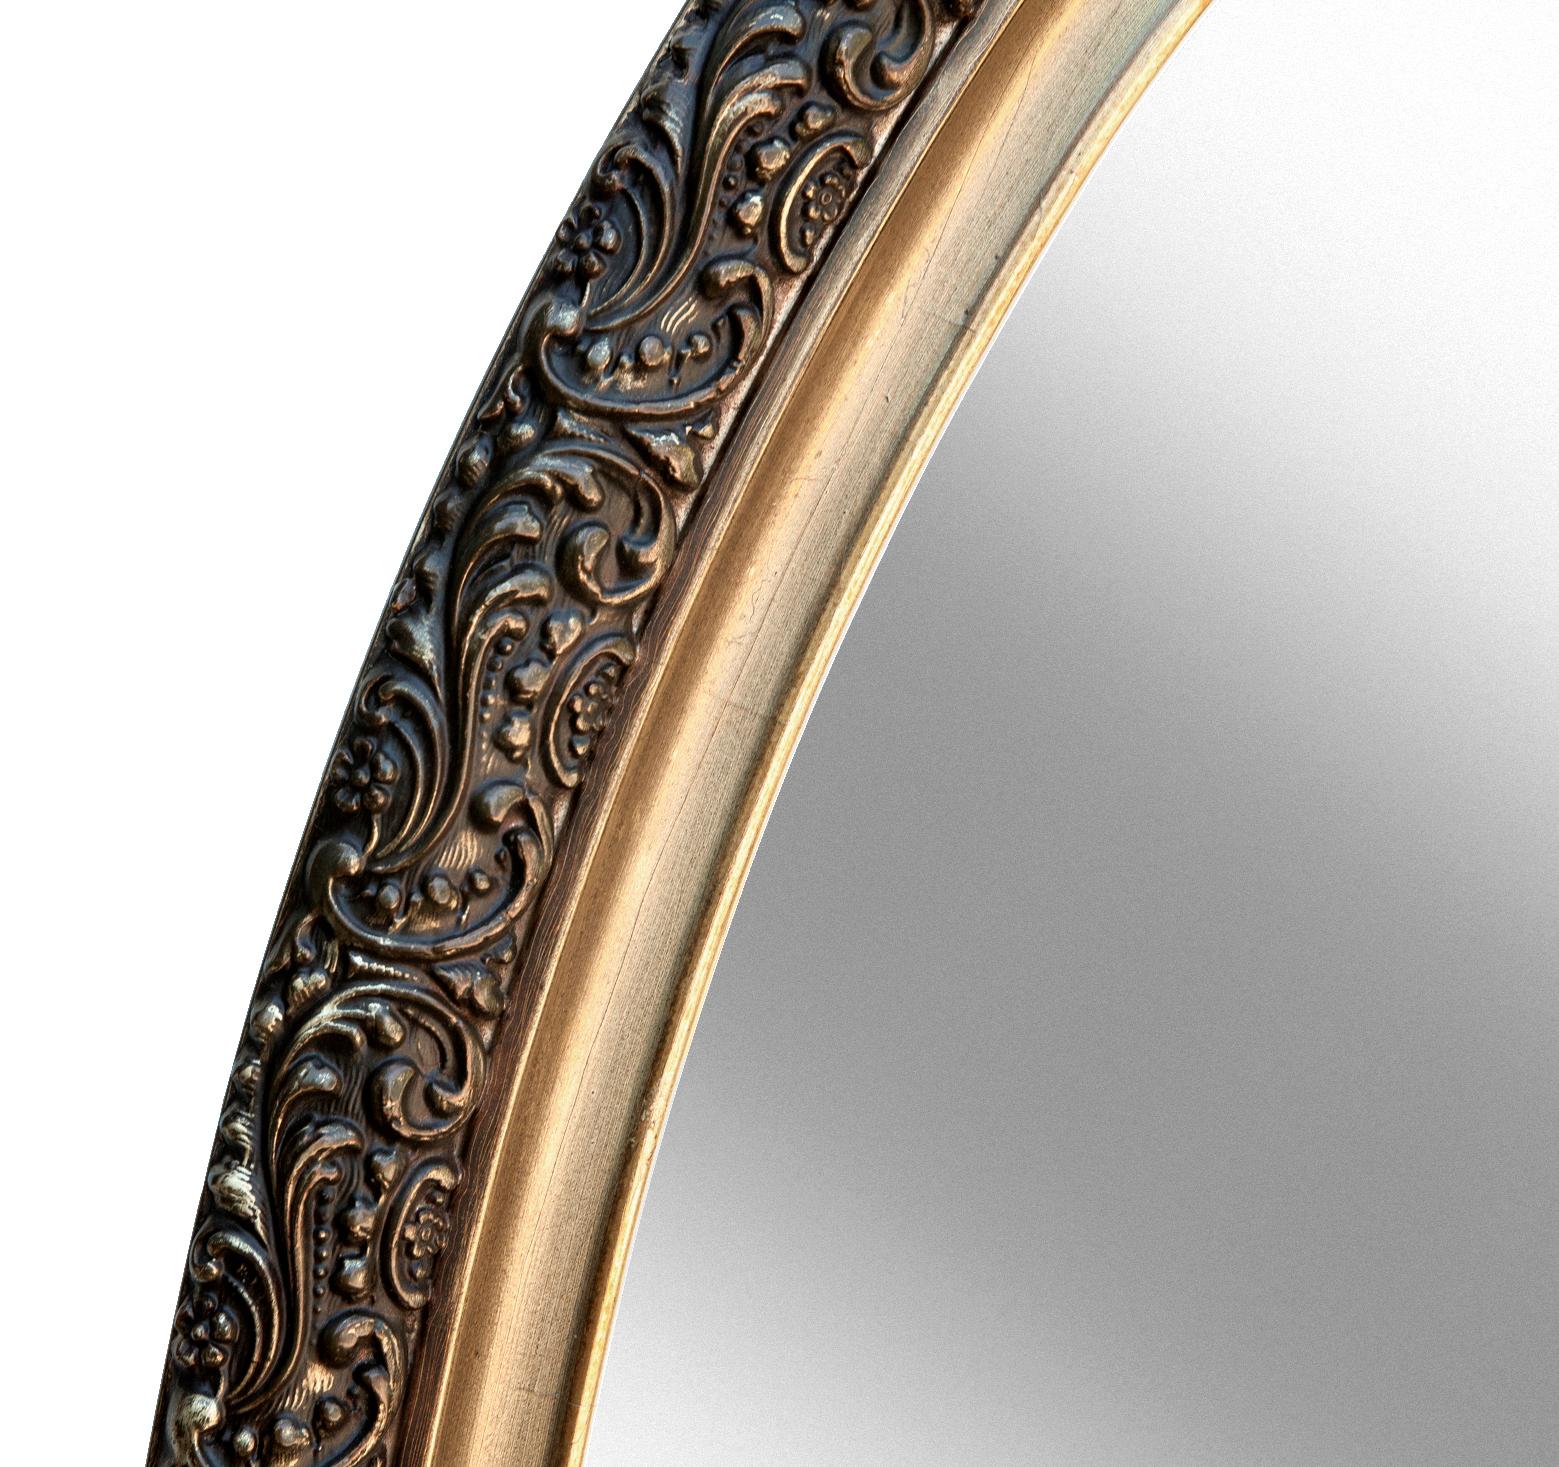 1940's Hollywood Recency style elongated mirror with gilt accents.
The darker tone enhances the ornate gilt accented broad border. 
Inner frame has a brighter edge around the darker convex antiqued channel.
Can be hung horizontally or vertically.

 